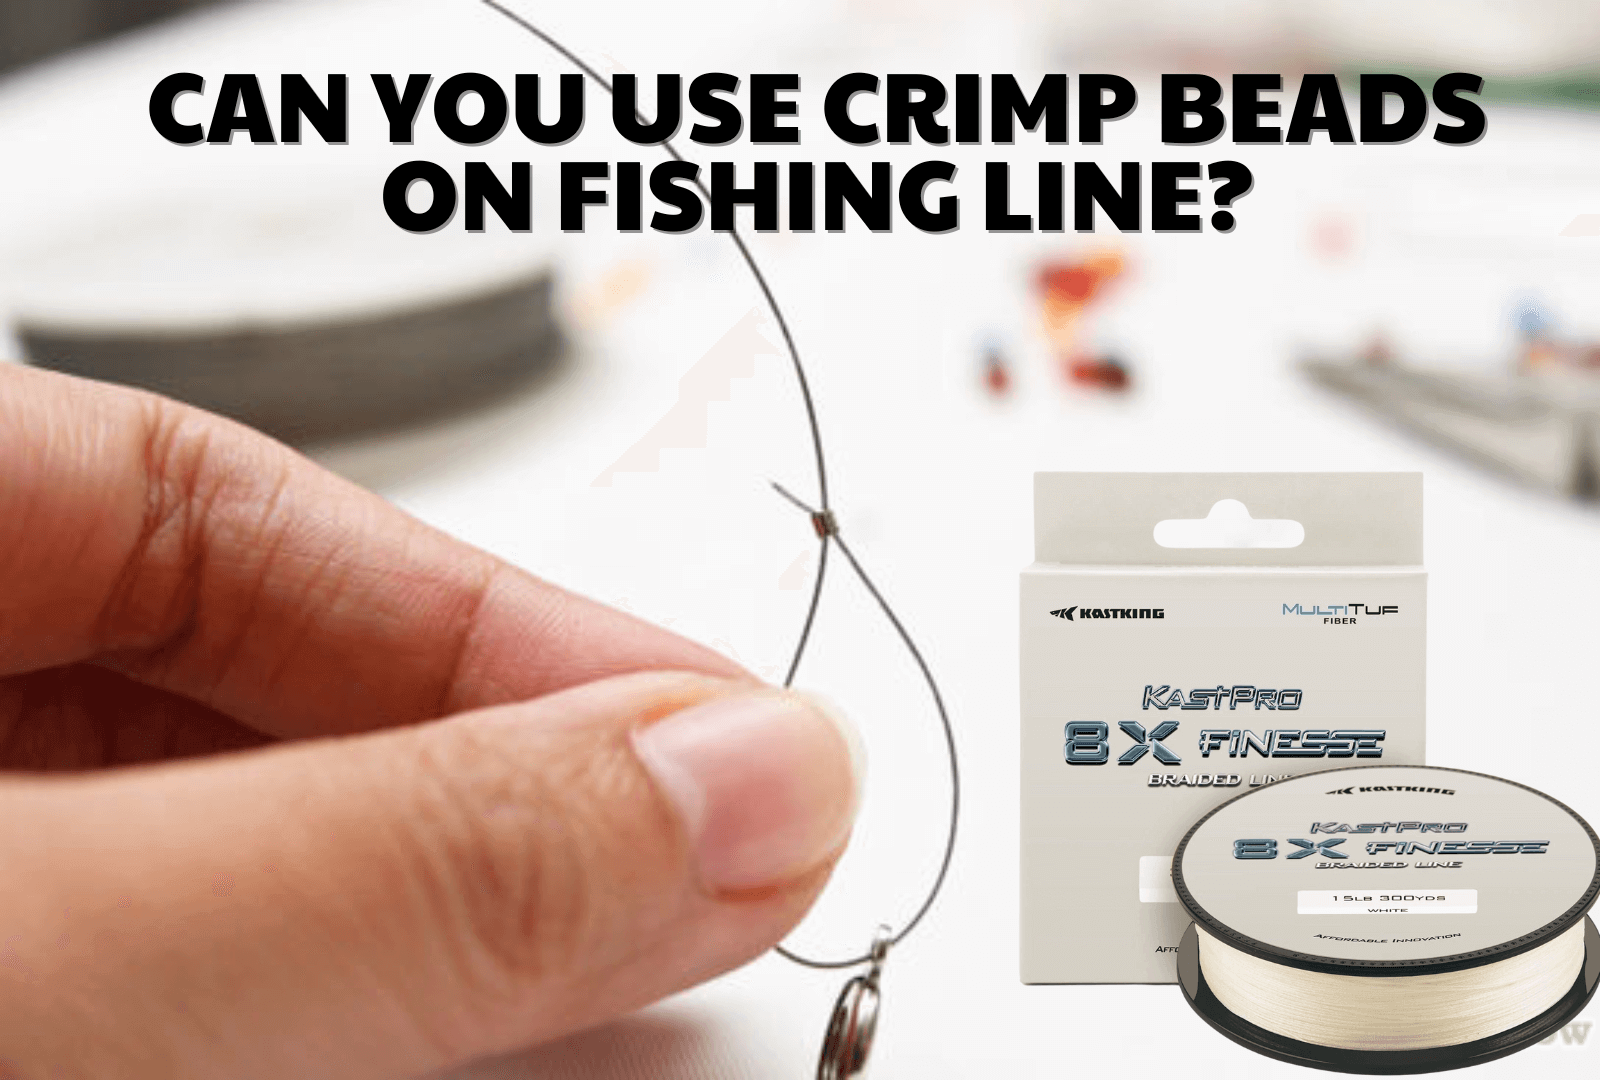 Can you use crimp beads on fishing line? Some tips for string and